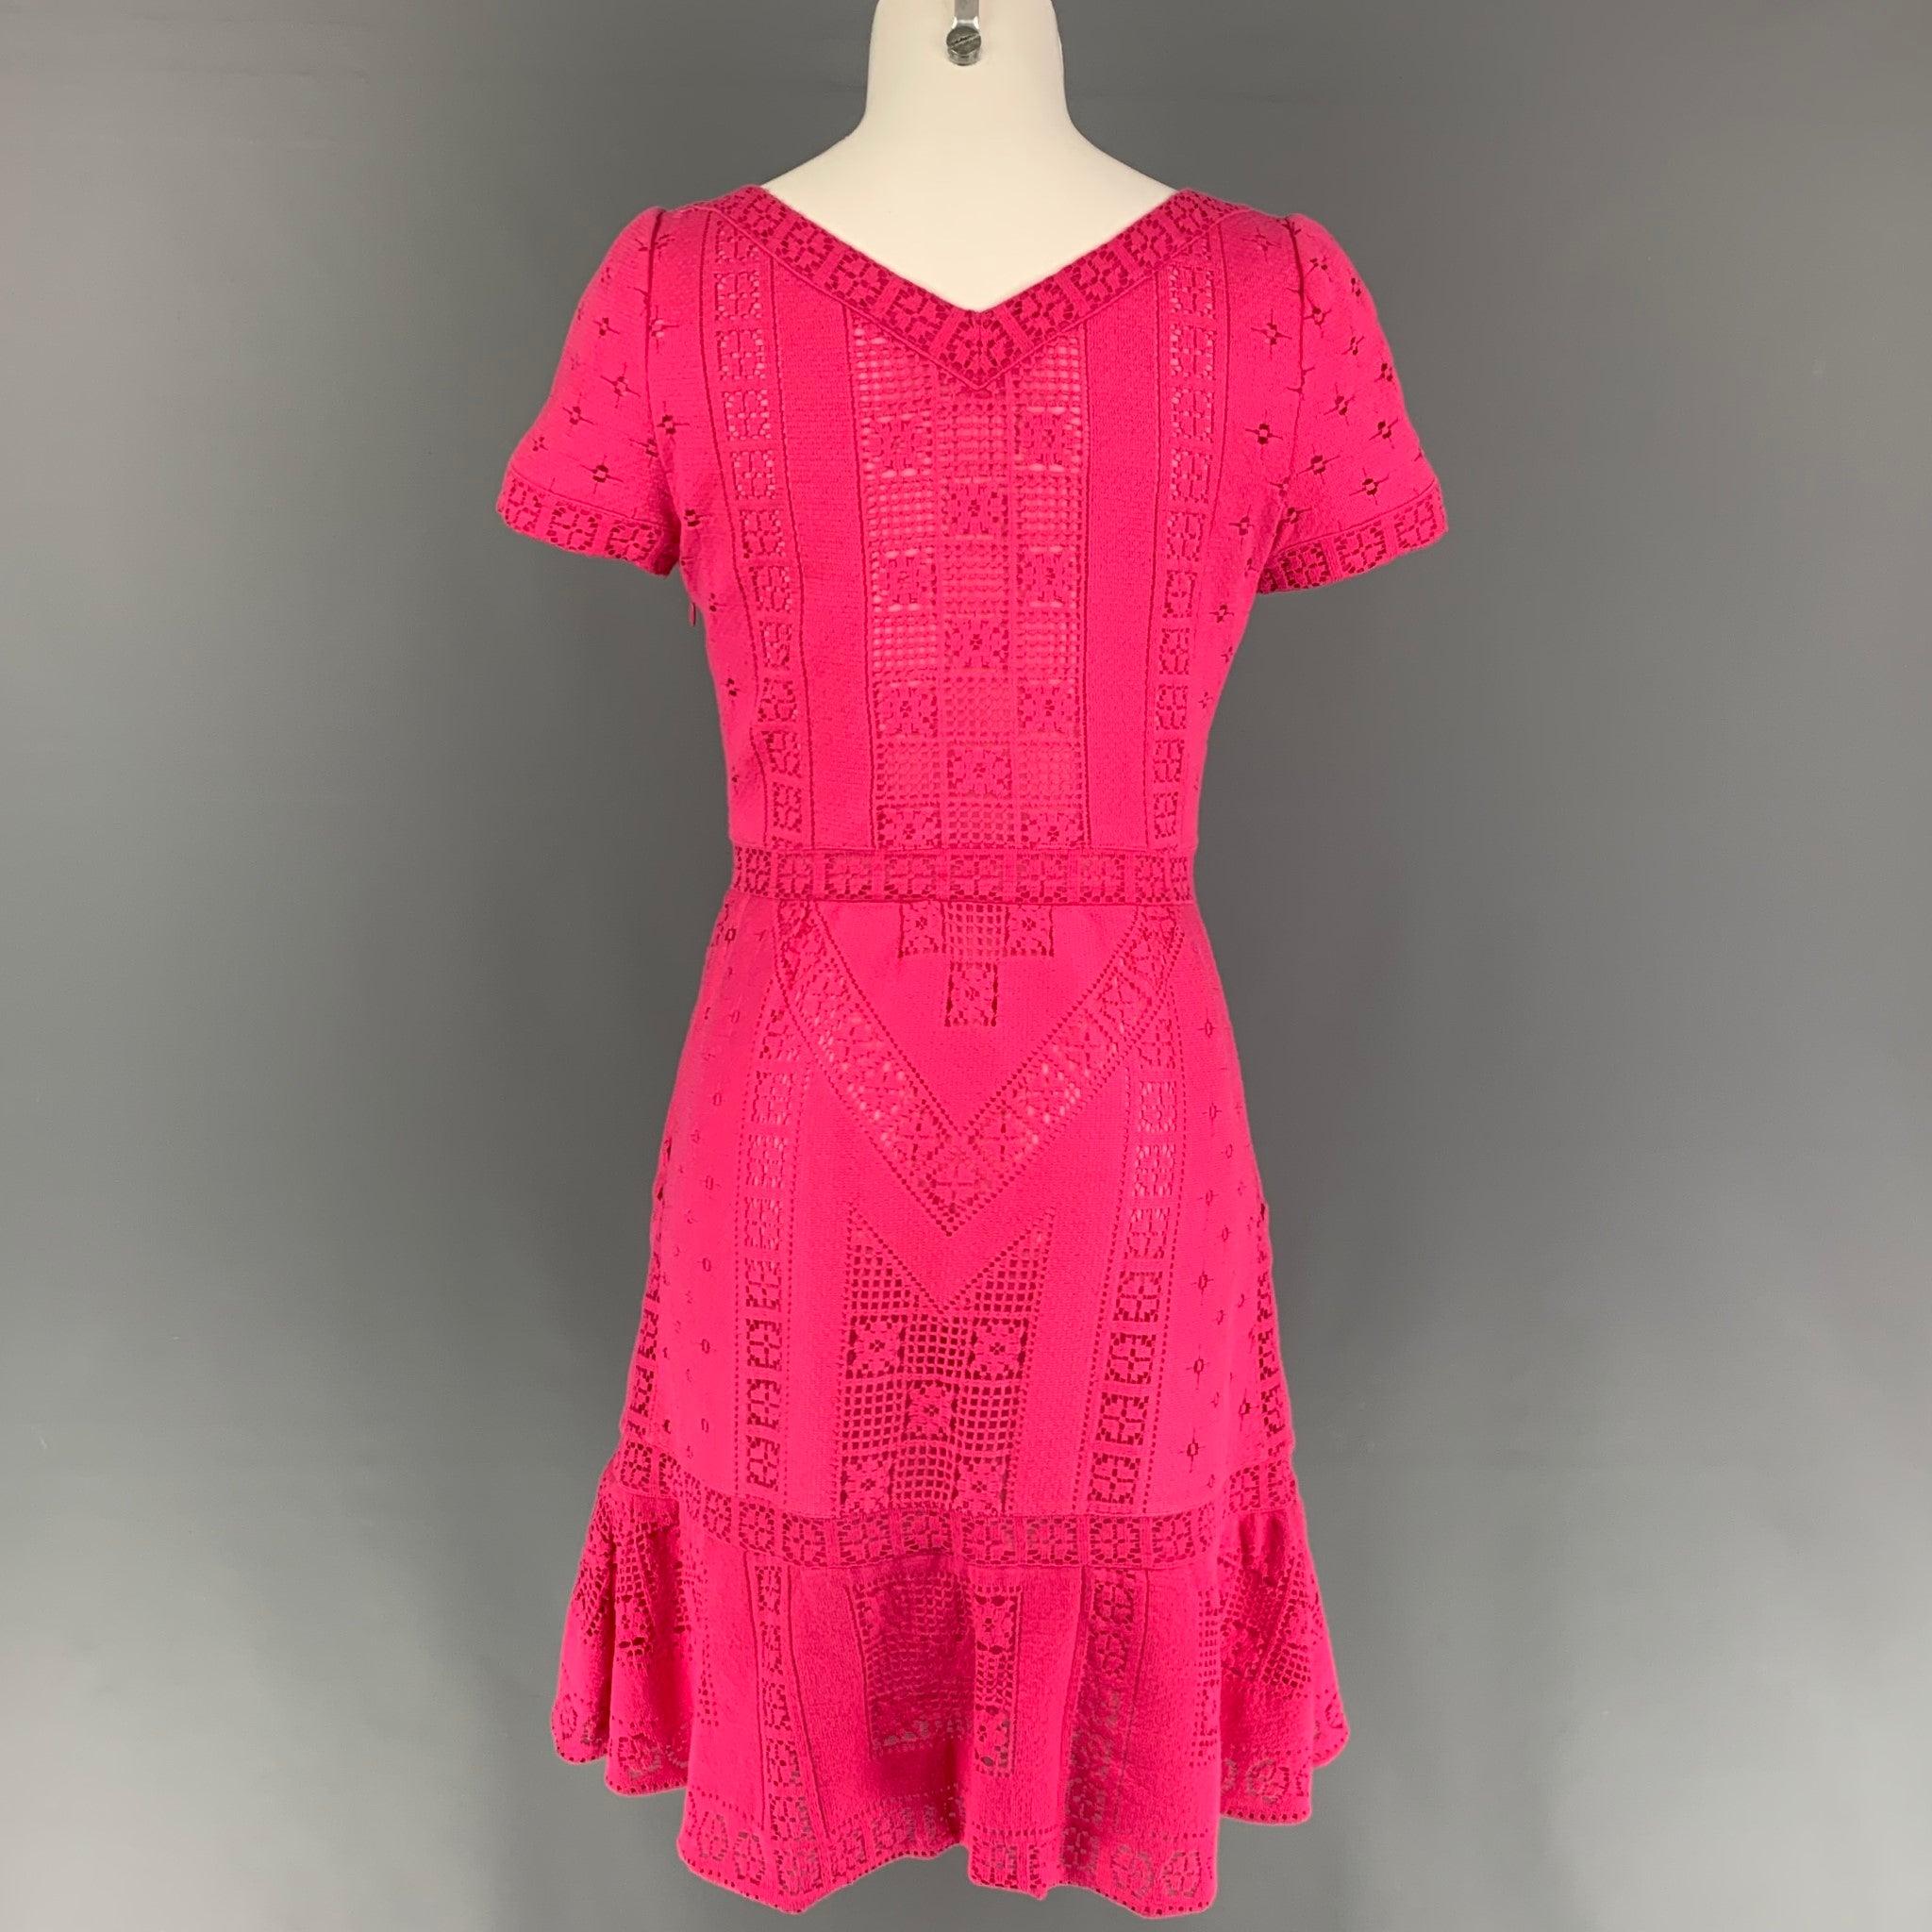 VALENTINO Size 4 Pink Cotton Nylon Lace Short Sleeve Dress In Good Condition For Sale In San Francisco, CA